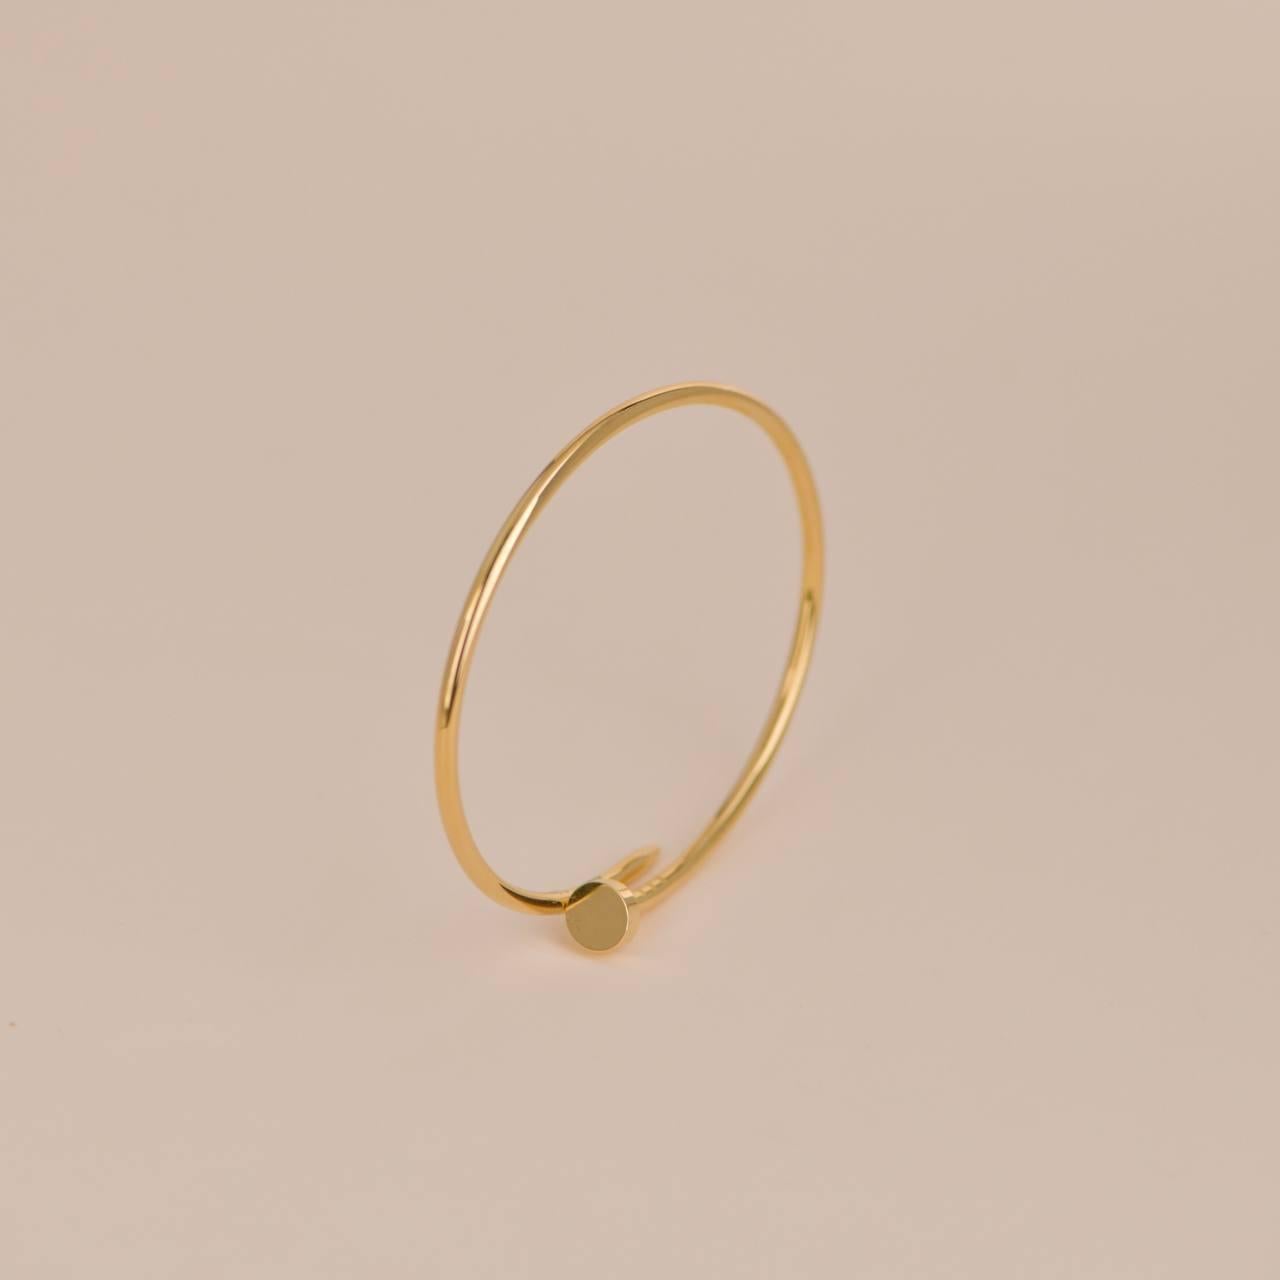 Cartier Juste un Clou Small Model Bracelet Yellow Gold Size 17 In Excellent Condition For Sale In Banbury, GB